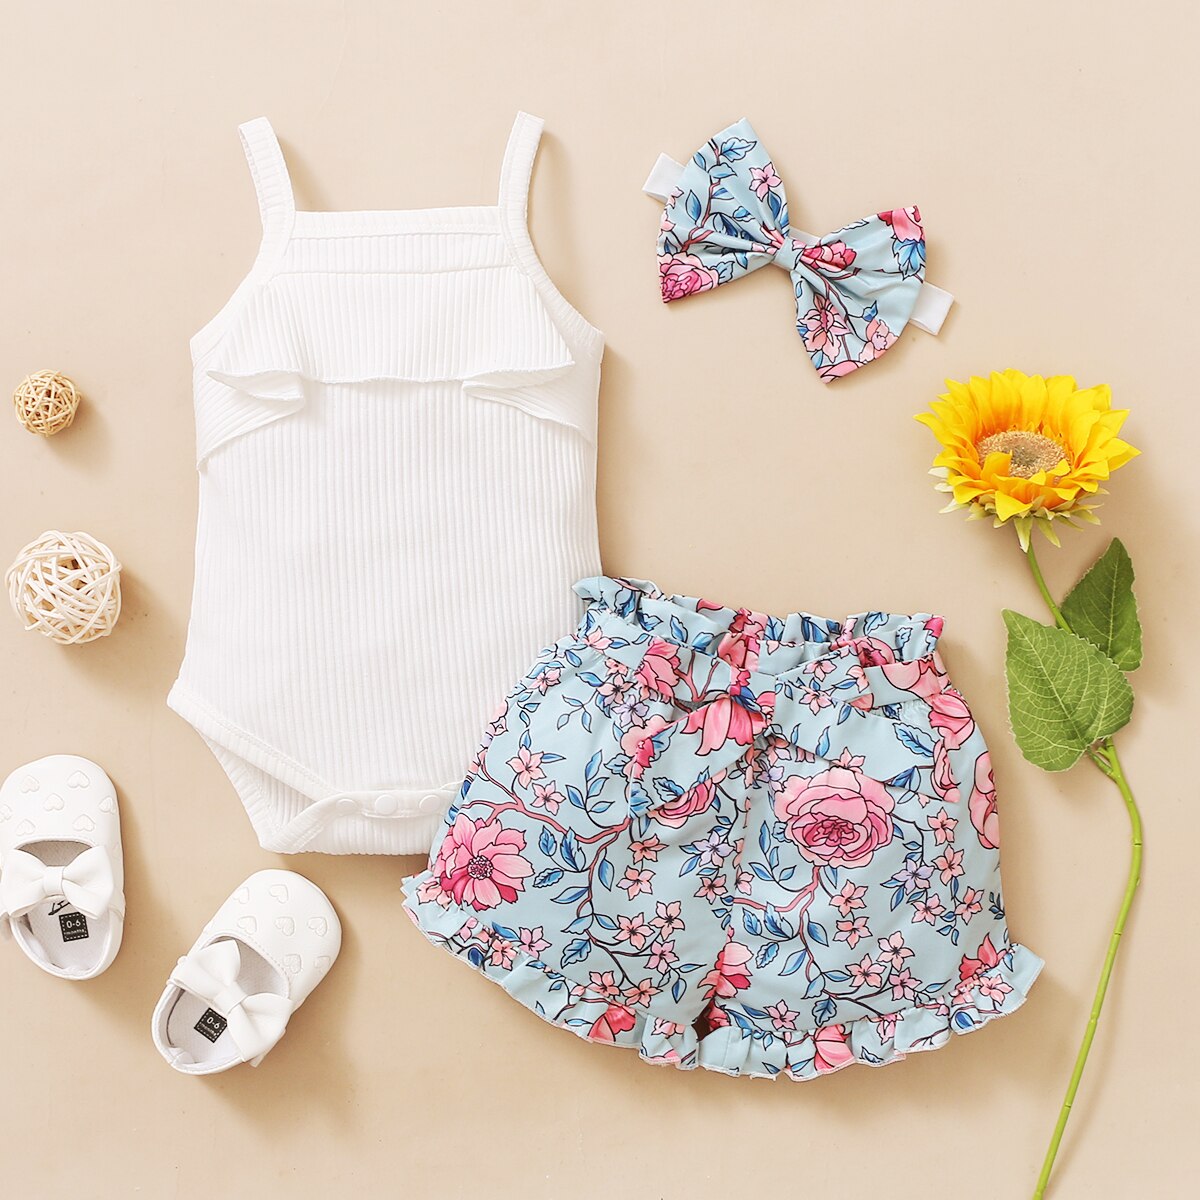 Baby-girl-this-cloth-lace-halter-dress-flower-print-shorts-suit-4